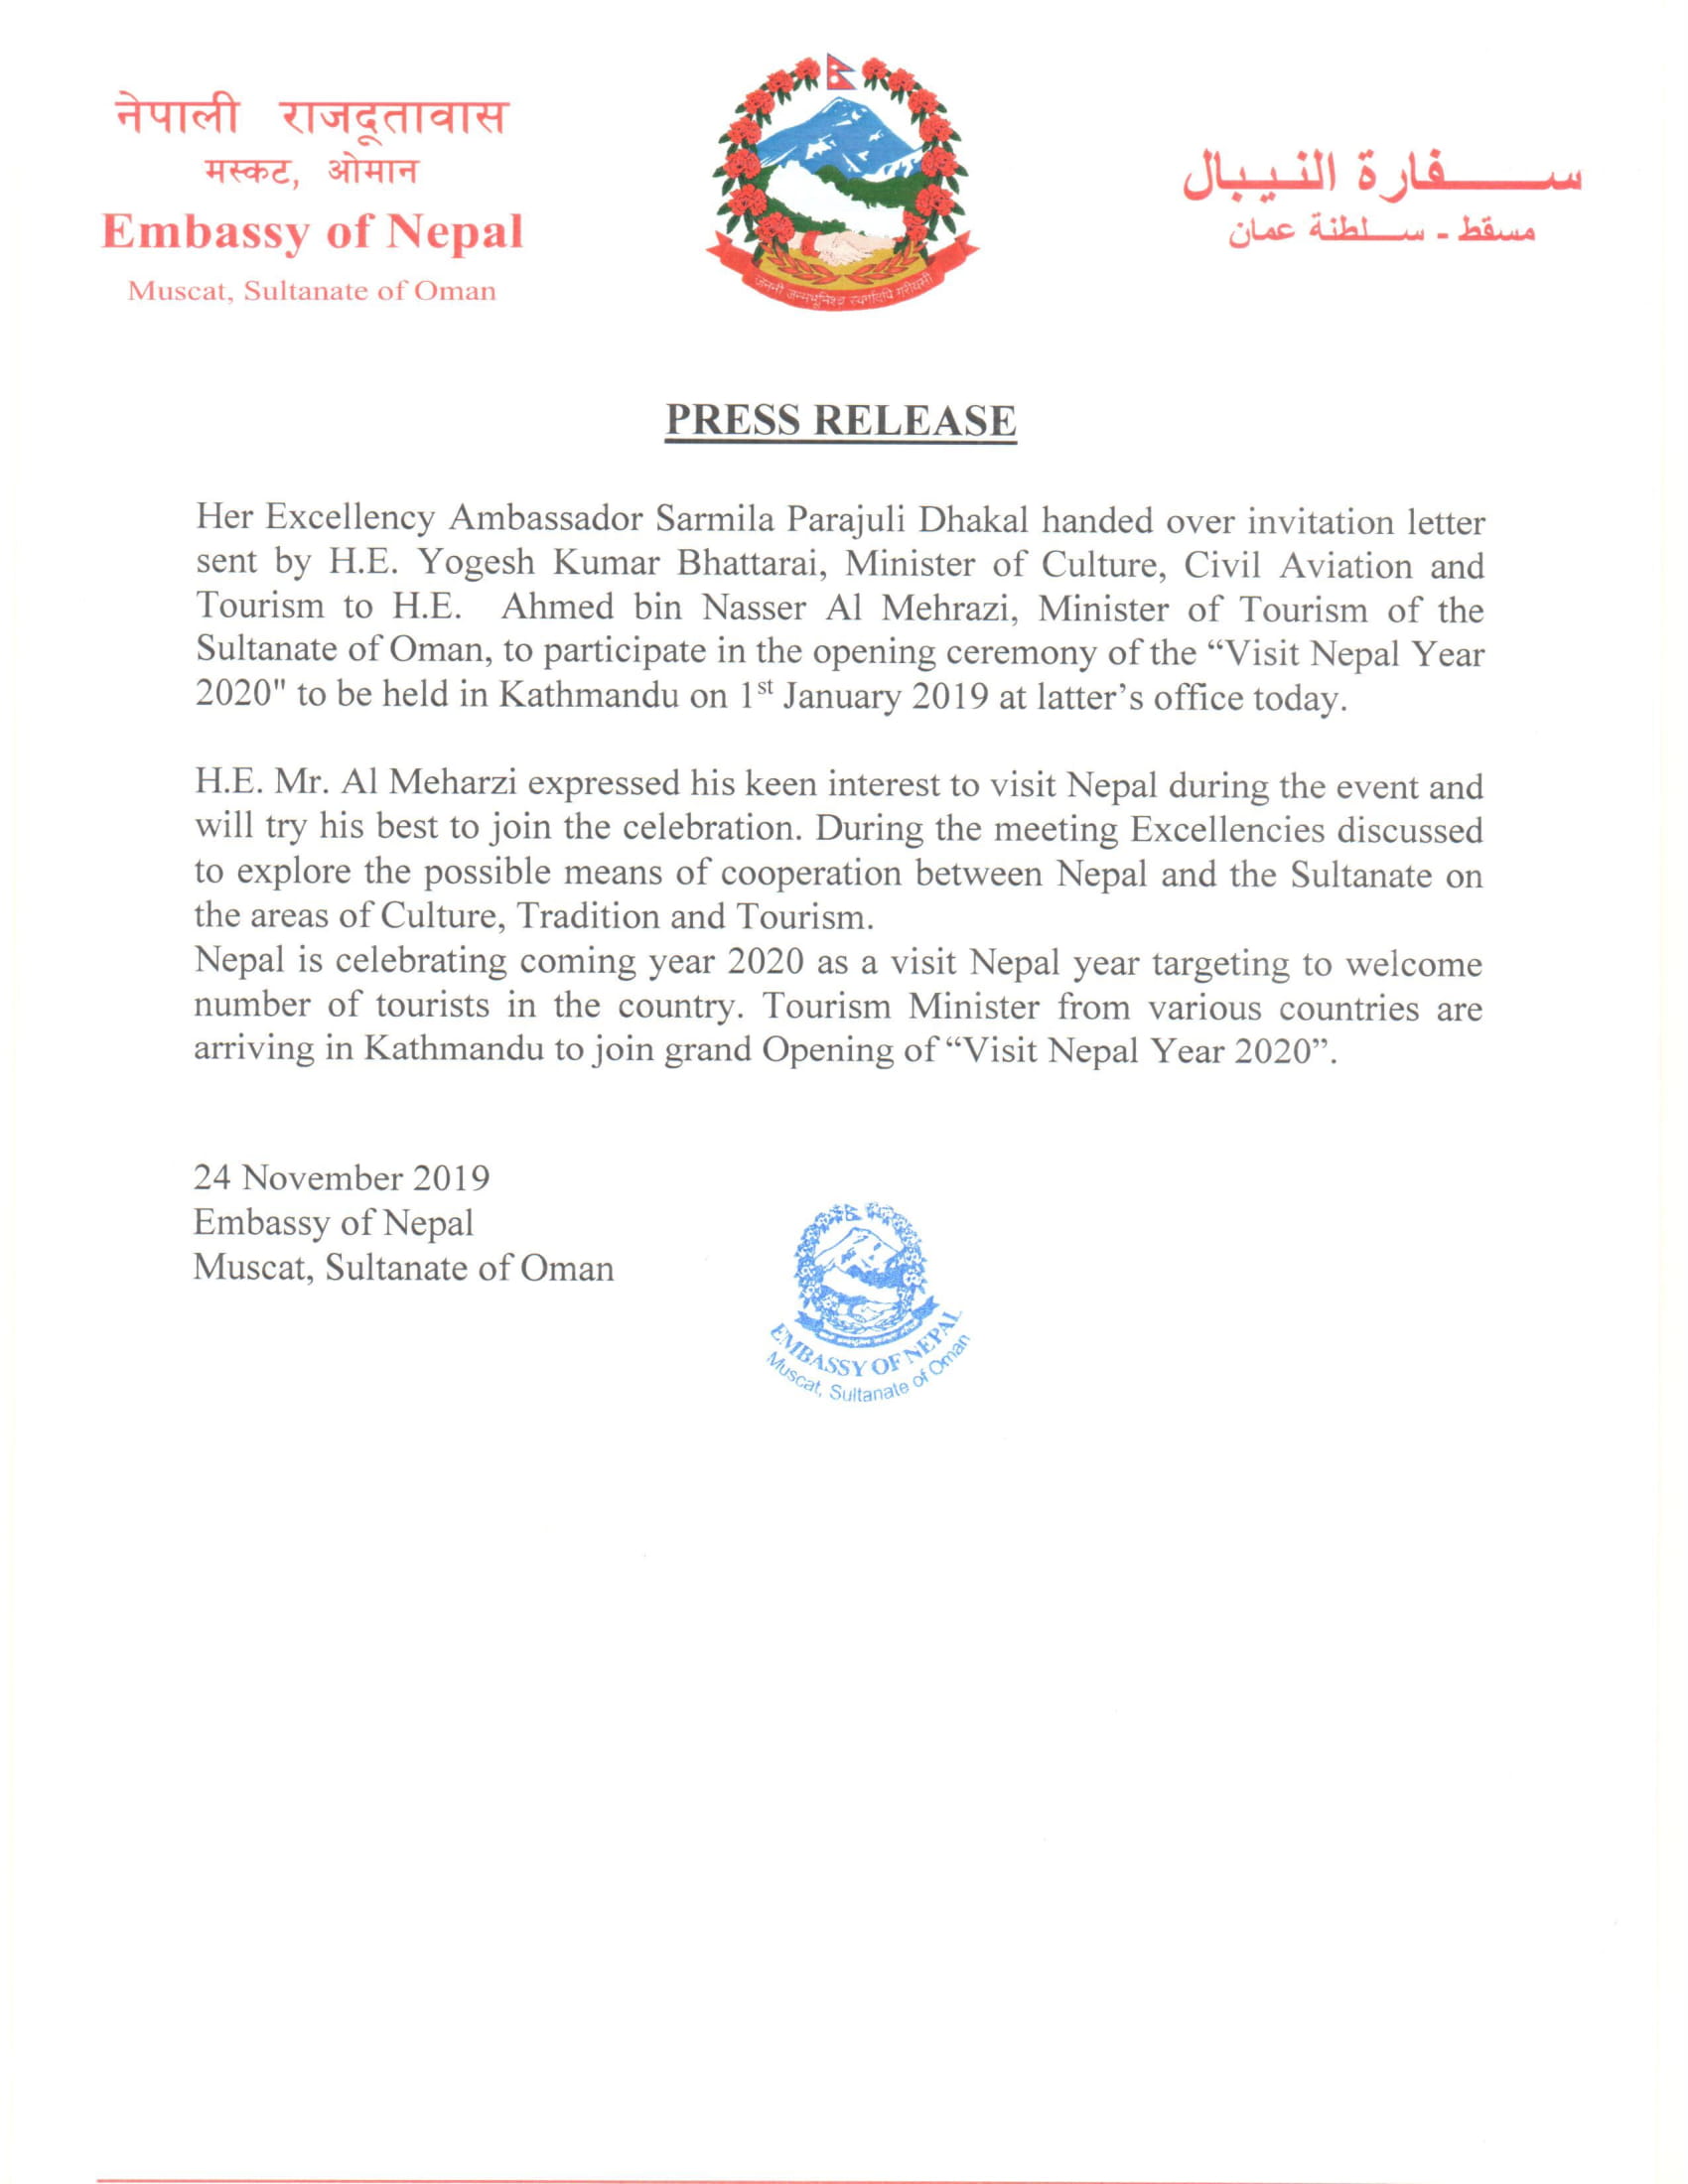 Press Release on Handing over of Invitation Letter to Minister of